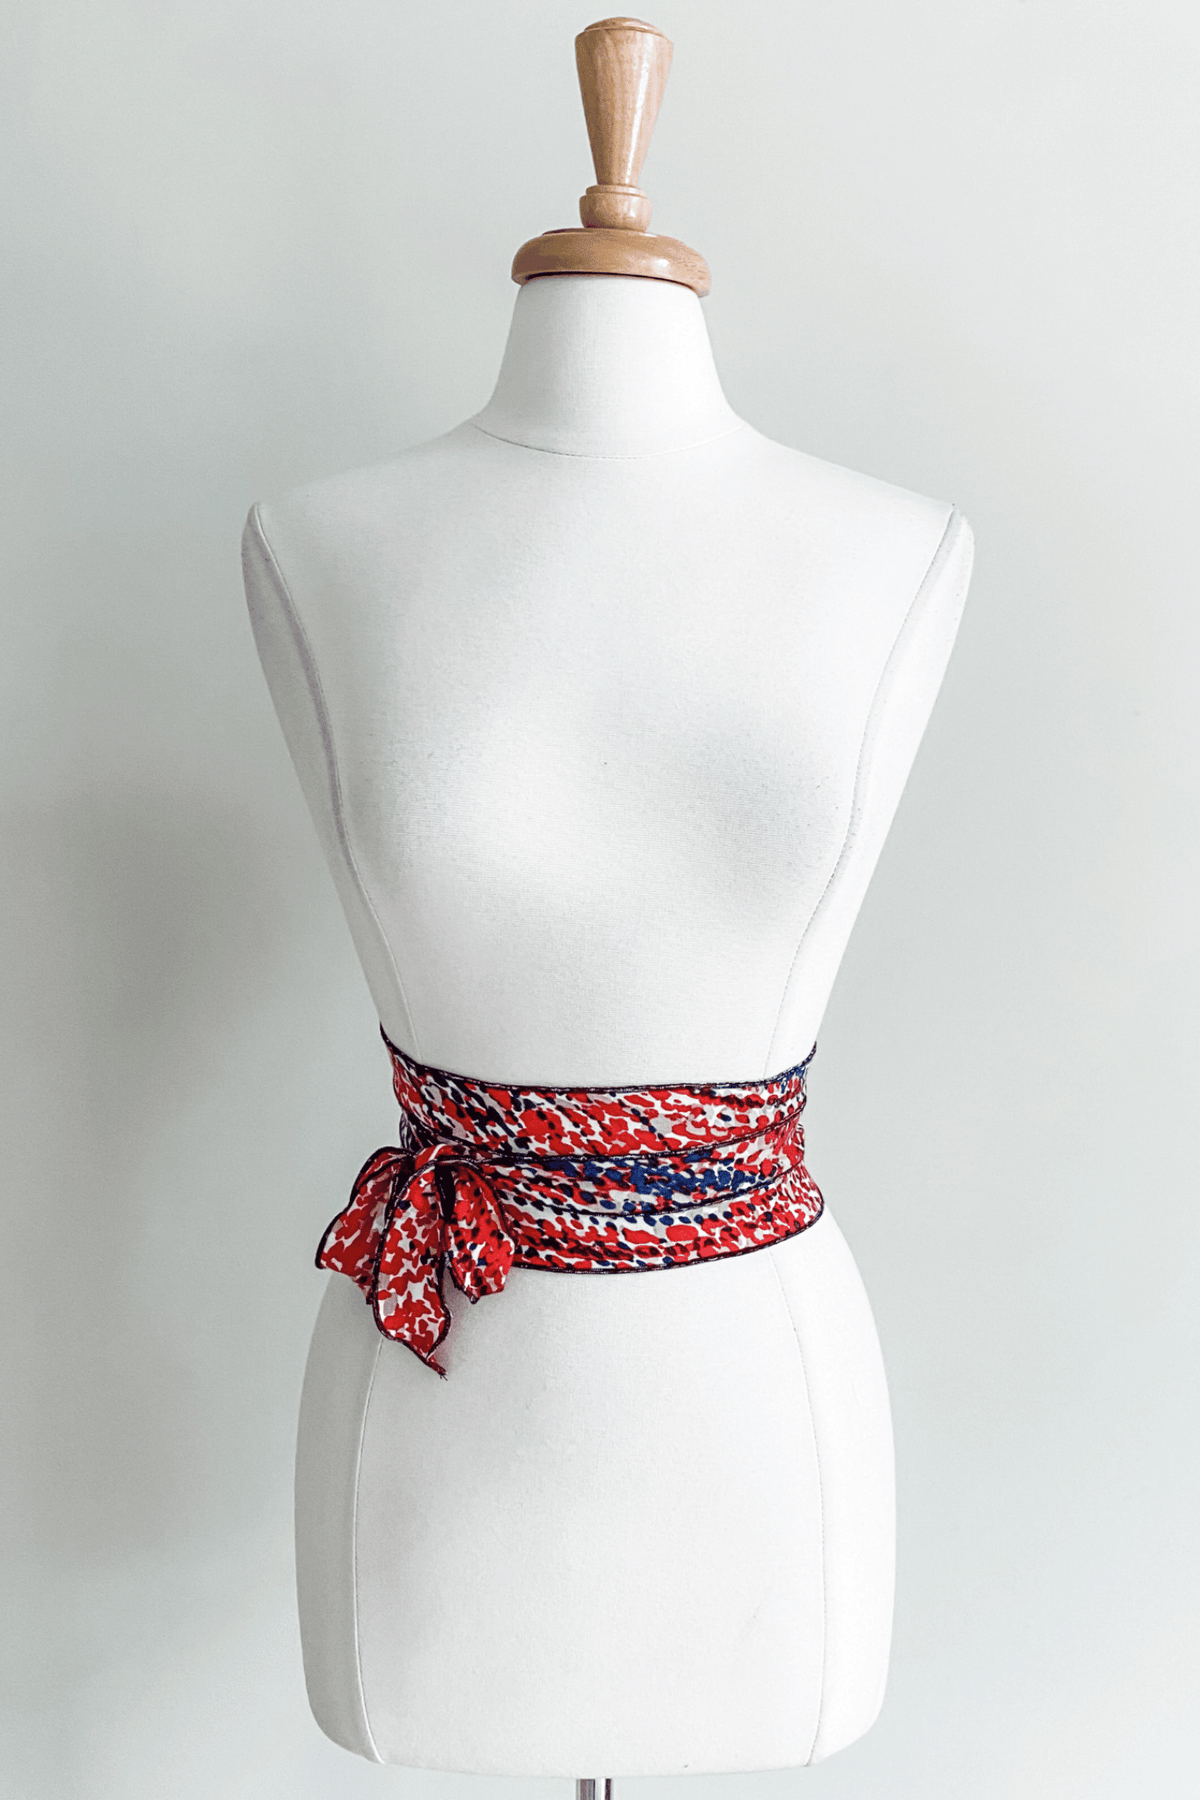 Diane Kroe Sash Prints (Whirlpool Red Navy) - Warm Weather Capsule Collection